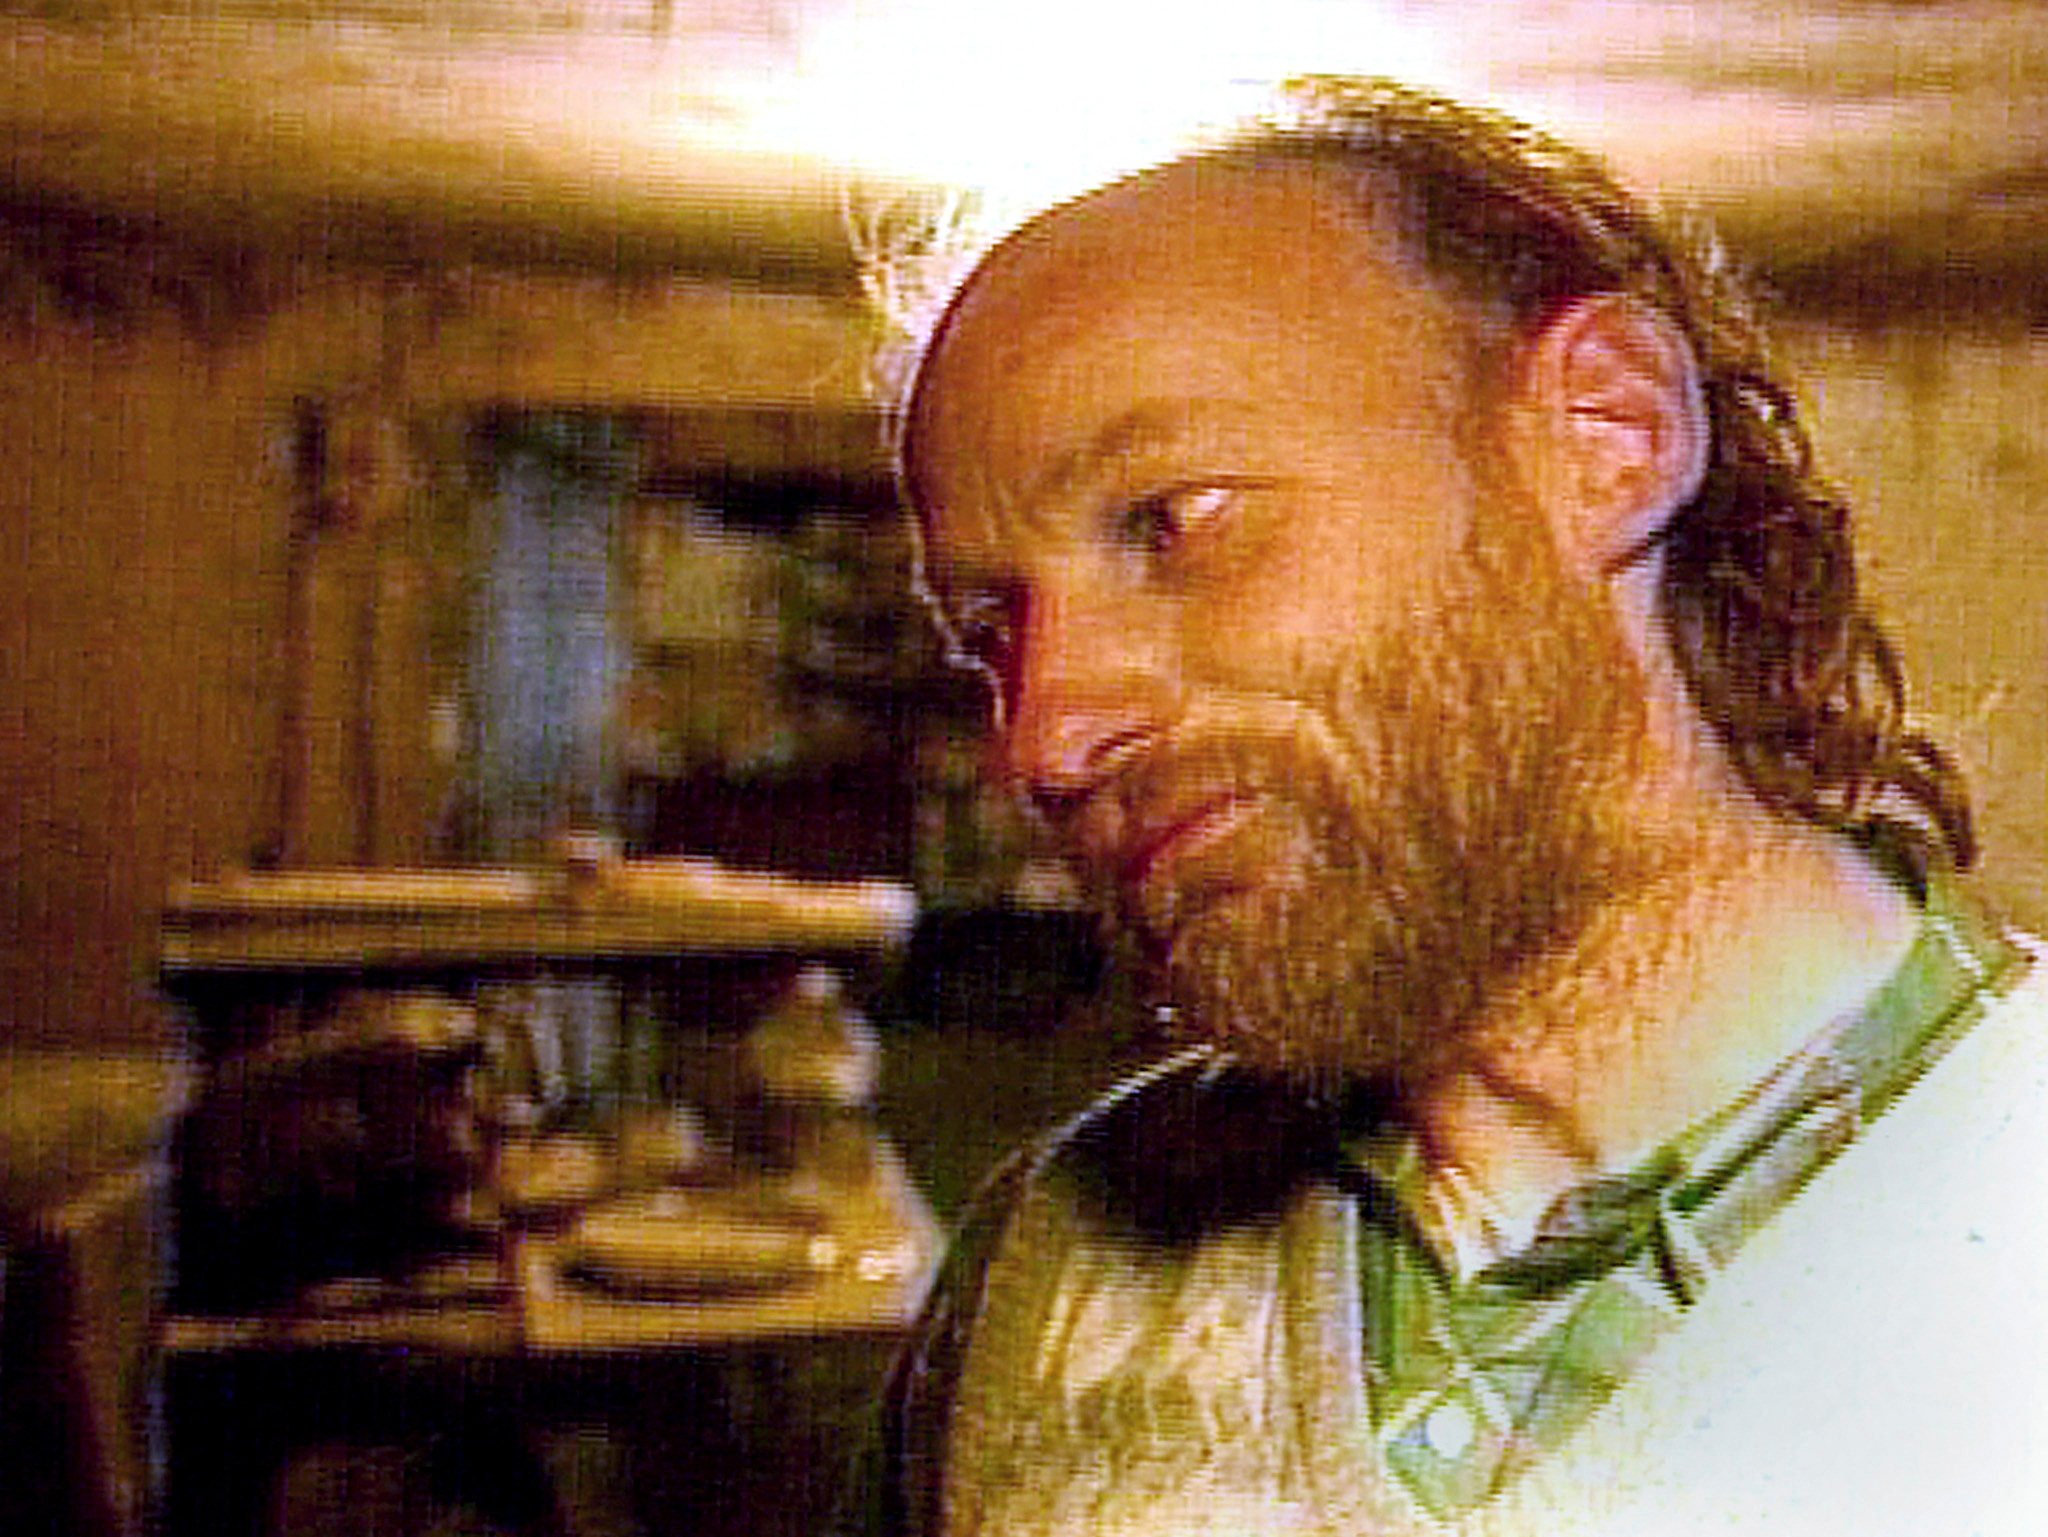 Robert Pickton is shown at his Port Coquitlam home in an undated file image. Photo: Reuters